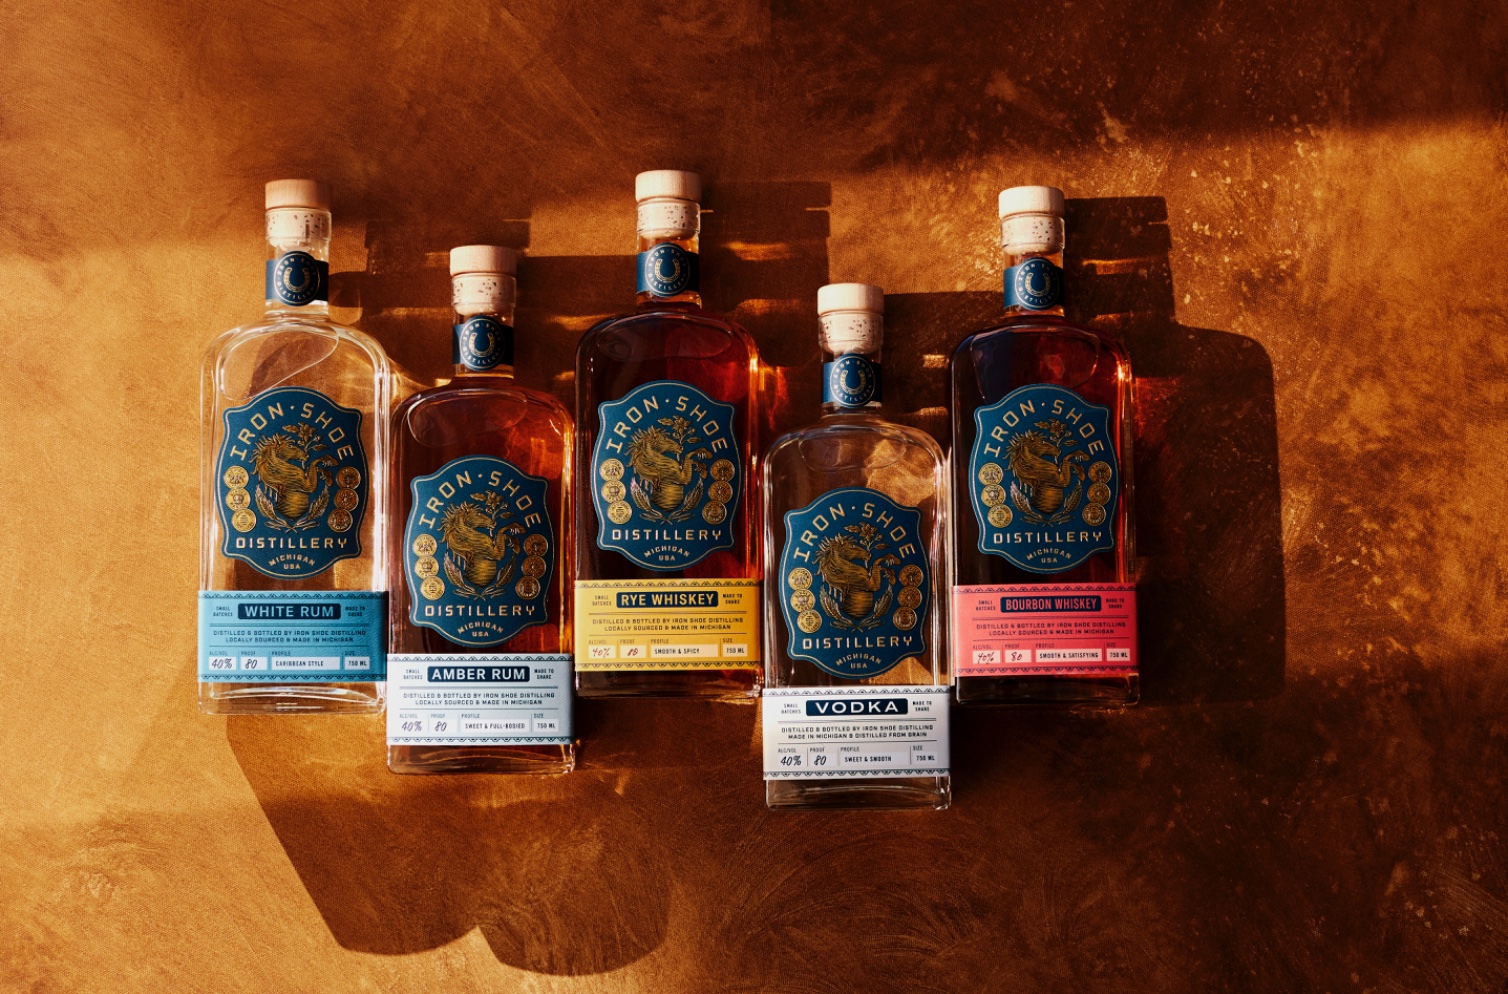 Iron Shoe Distillery Shares Their Deep-Rooted Value of Community